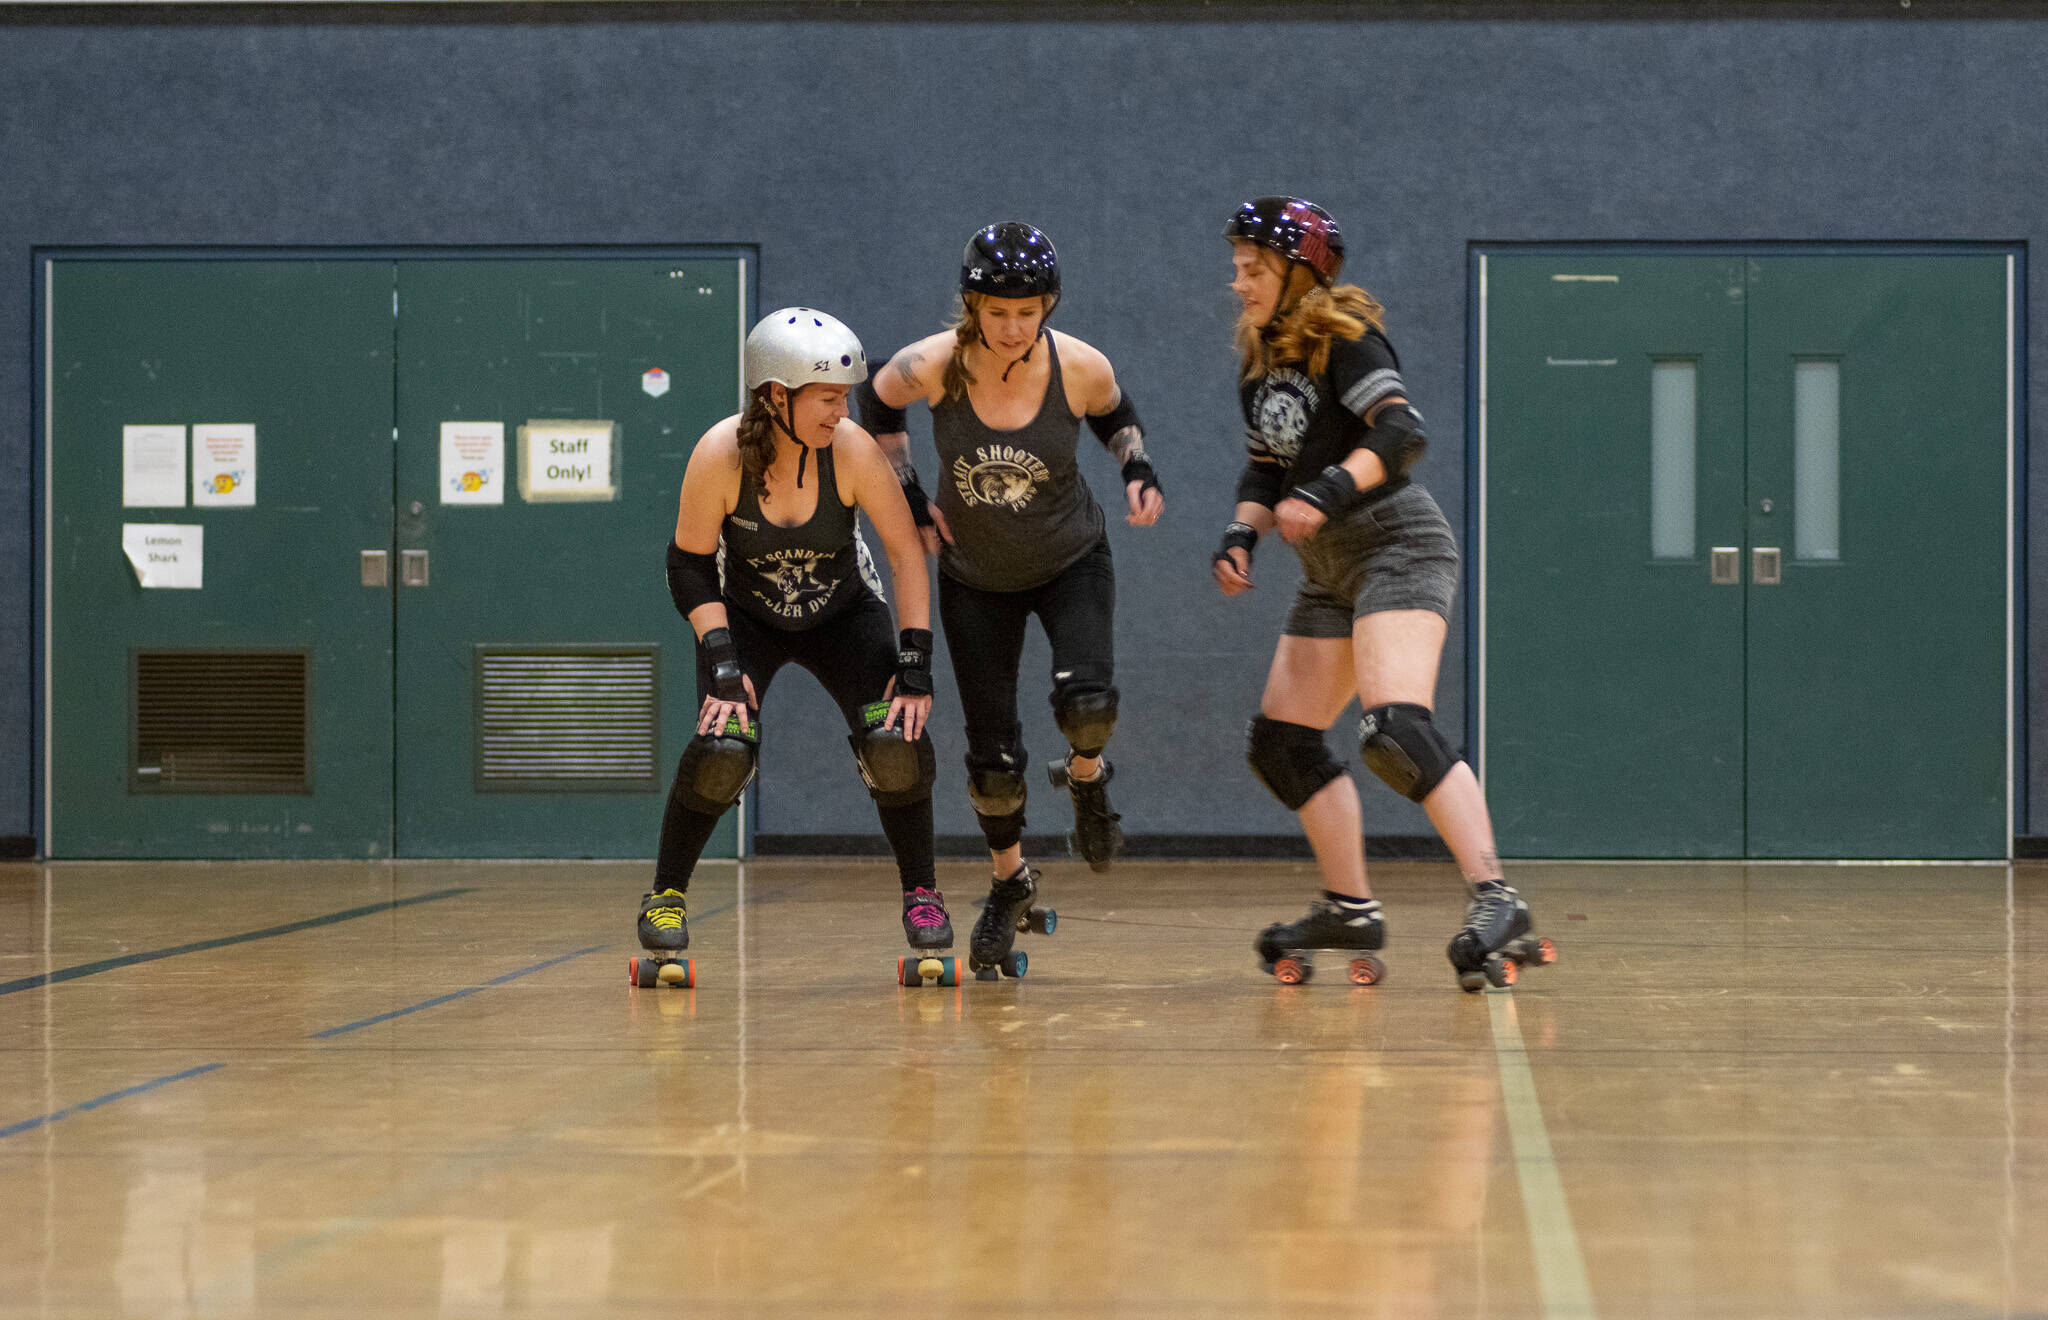 Emily Matthiessen / Olympic Peninsula News Group
From left, Amber Ahrens, Shauna Rogers McClain and Brittney Vincent practice blocker and jammer moves at a recent roller derby practice.